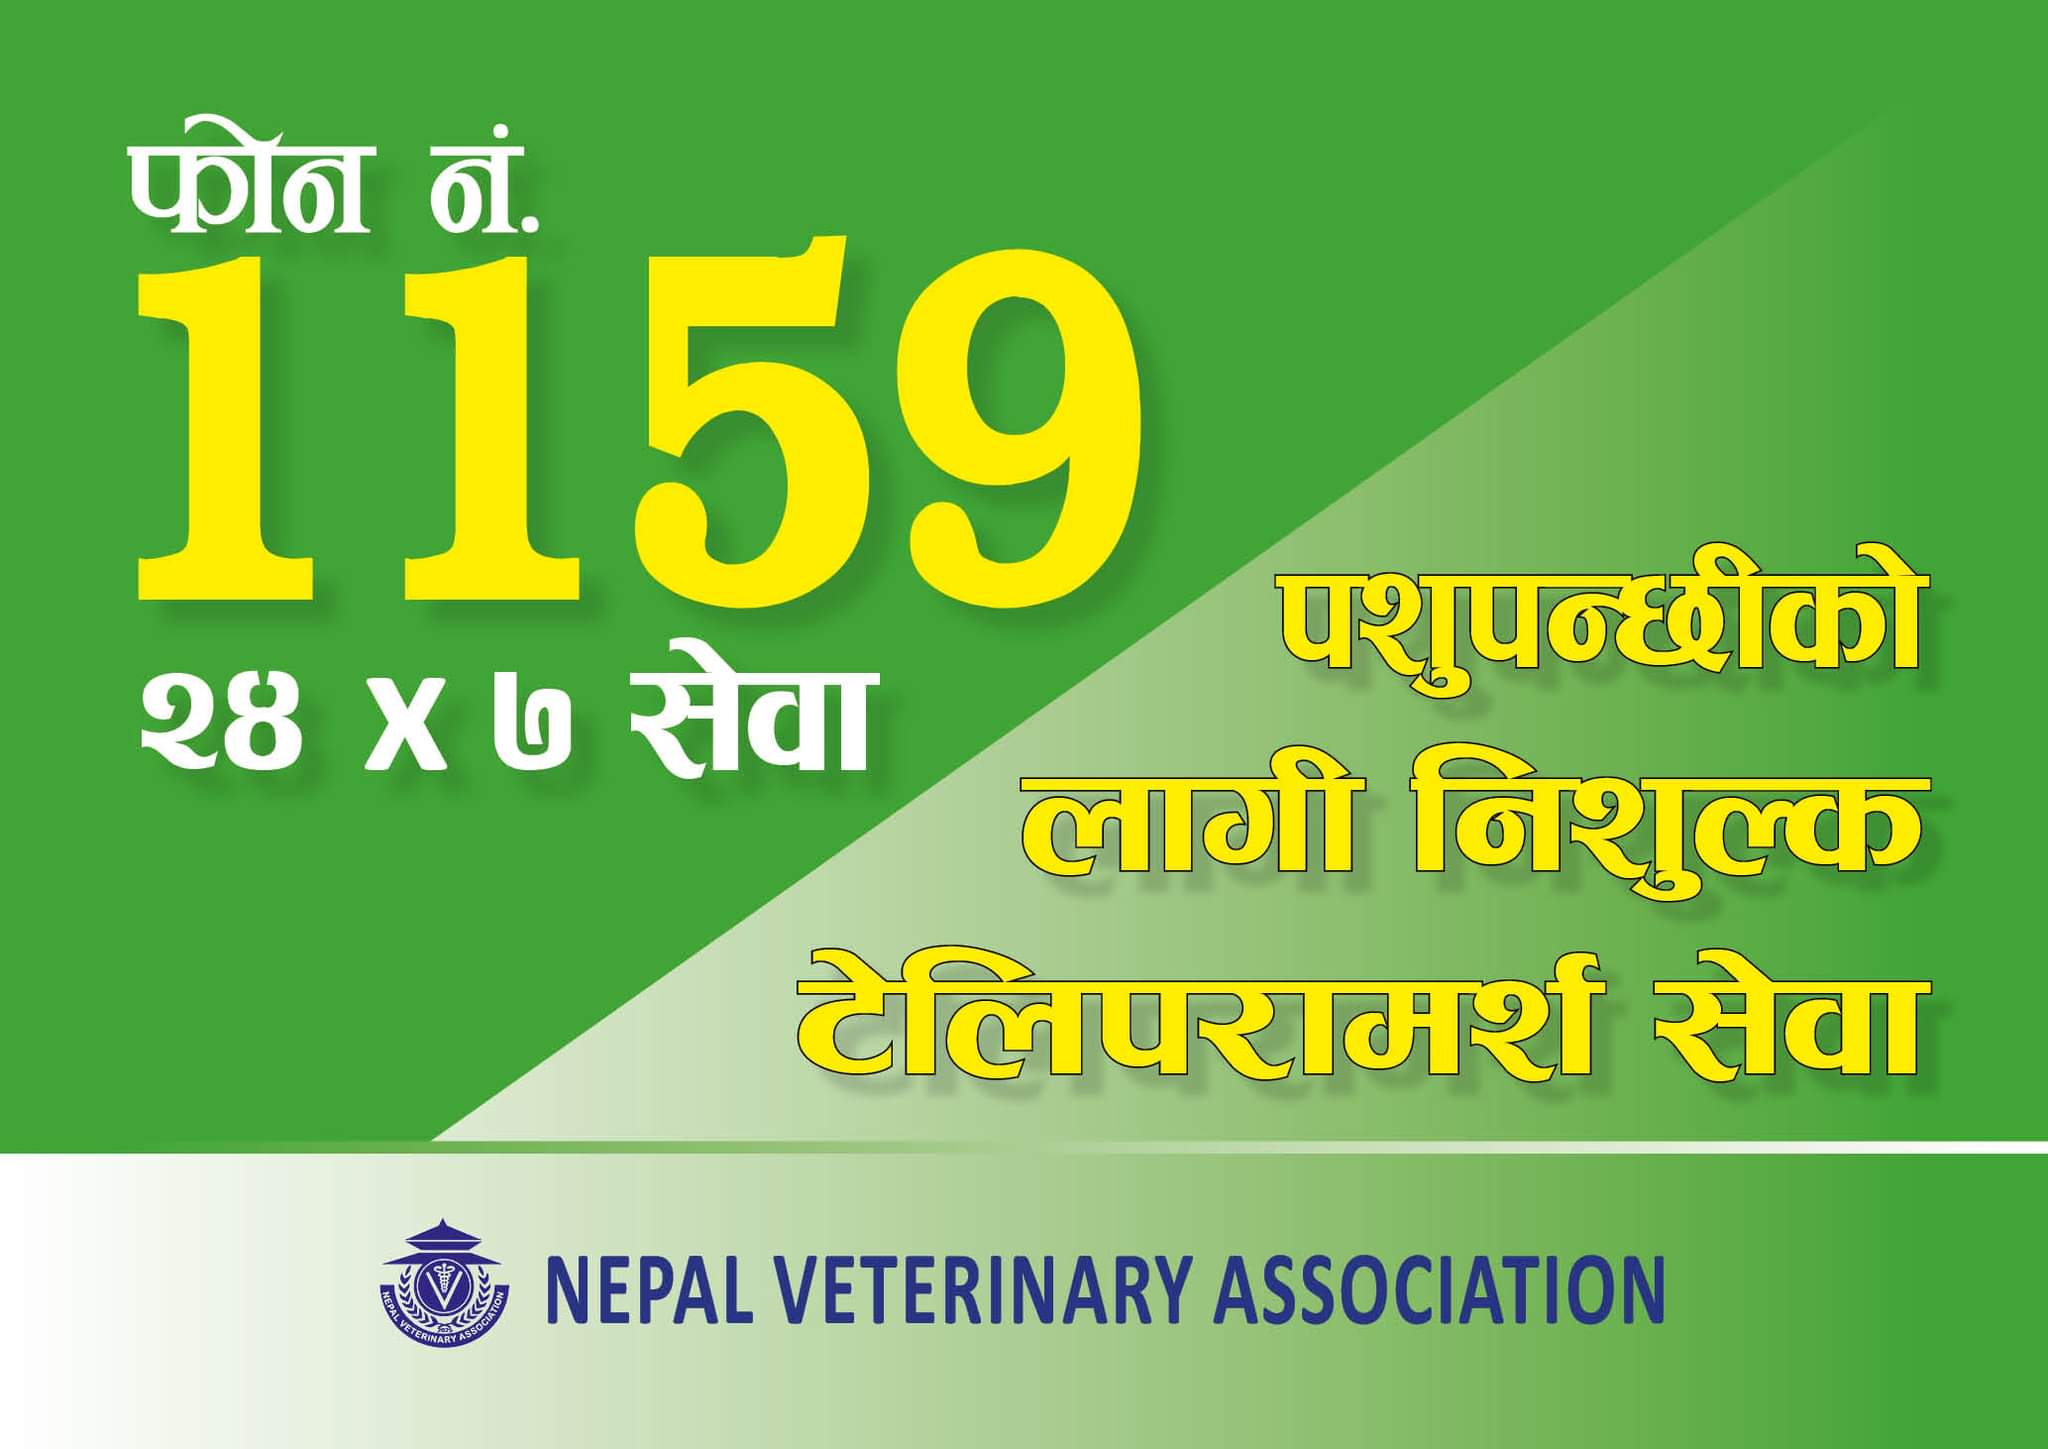 Nepal Veterinary Association starts its 24 hour hotline service for animal owners